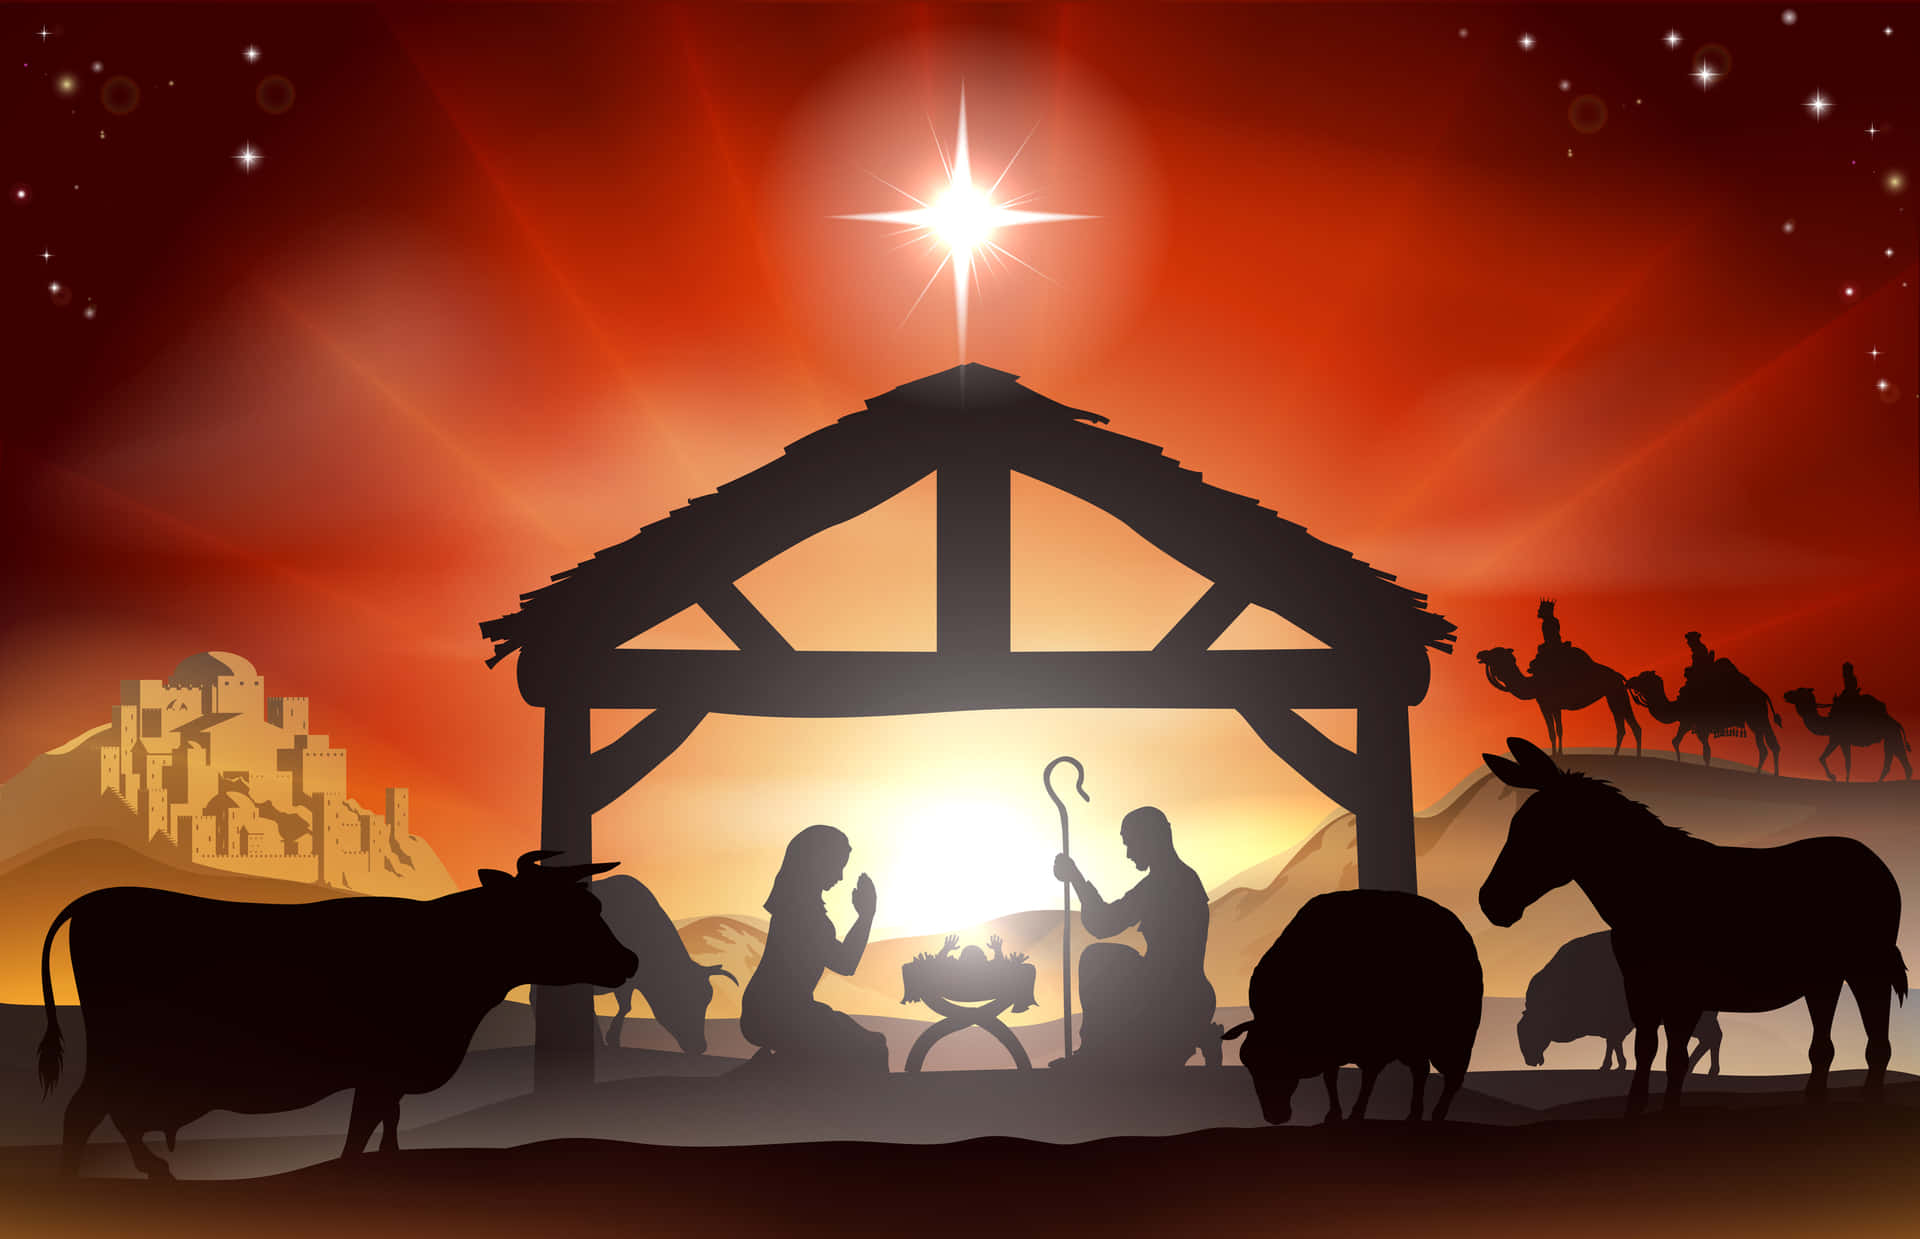 Christmas Nativity Scene With Silhouettes Of Jesus And His Family